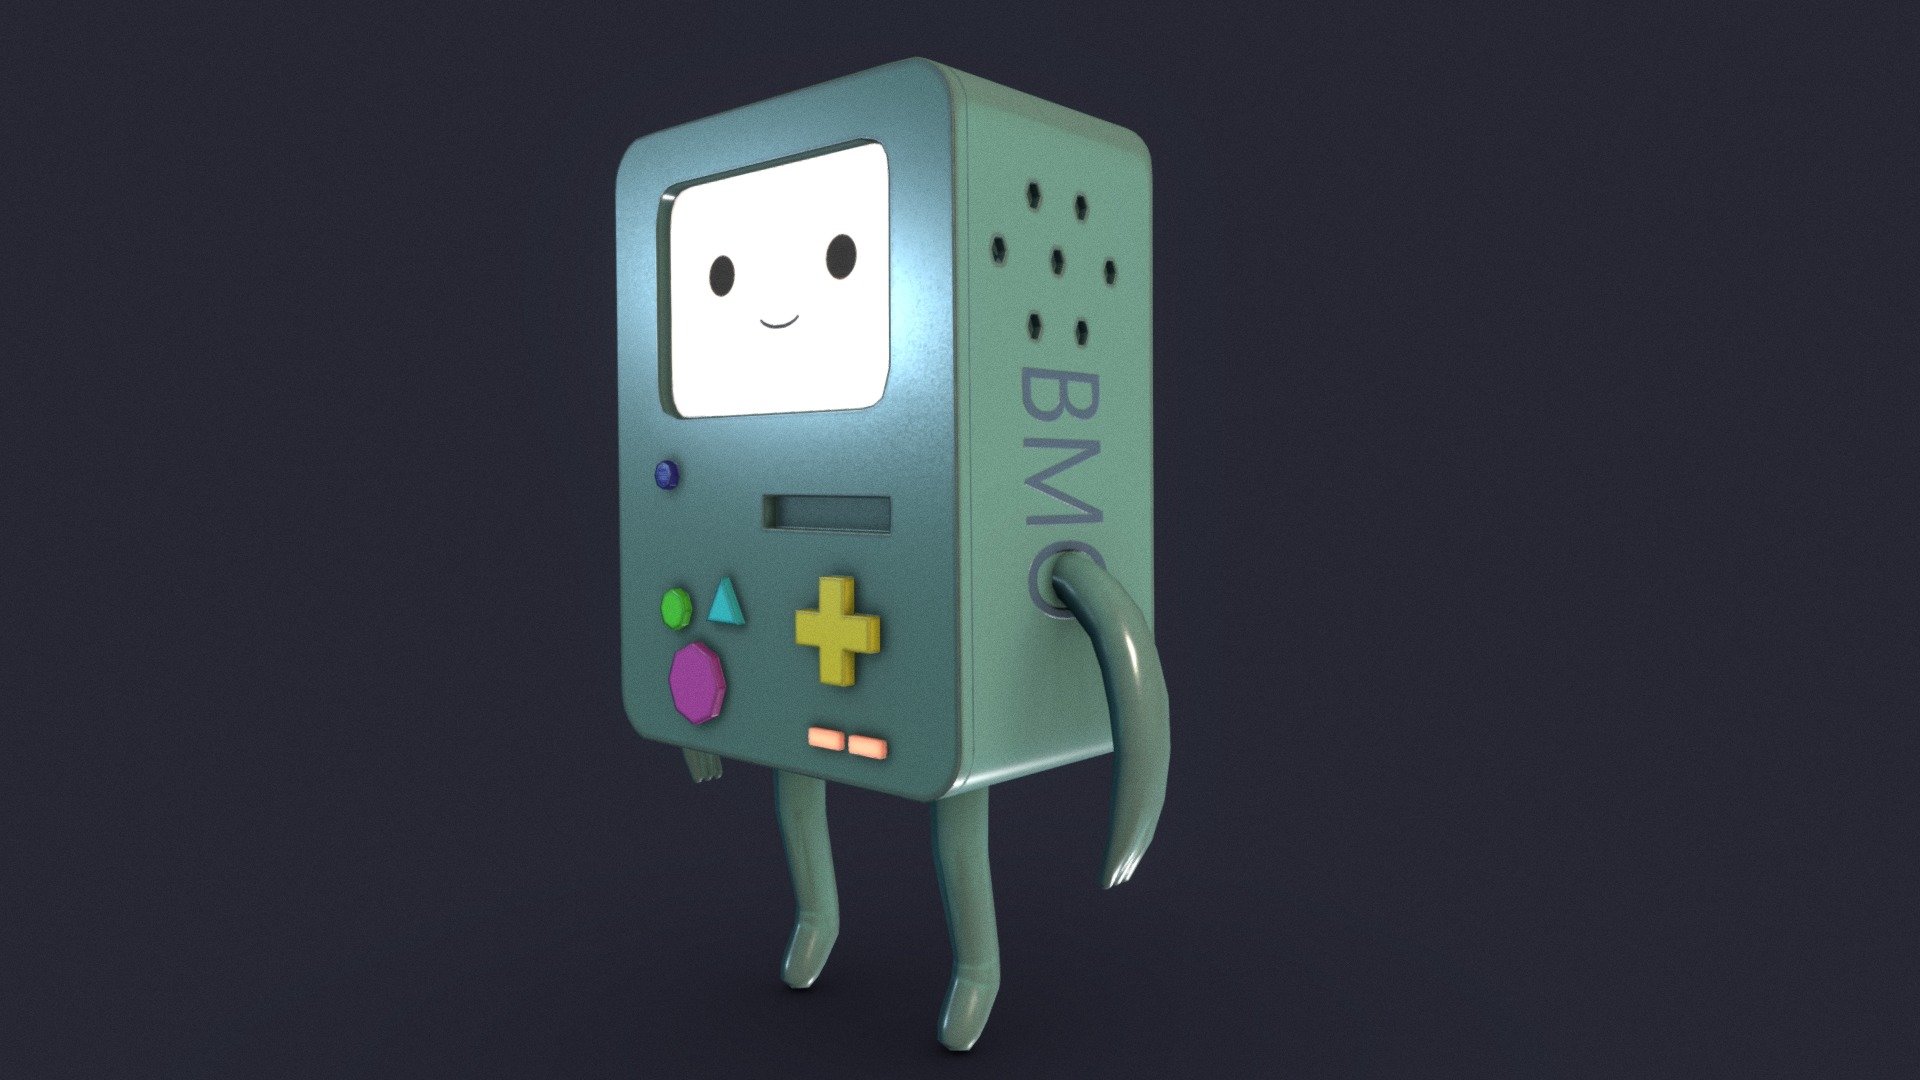 This model is a video game console of Finn and Jake from the animated series &ldquo;Adventure Time with Finn &amp; Jake